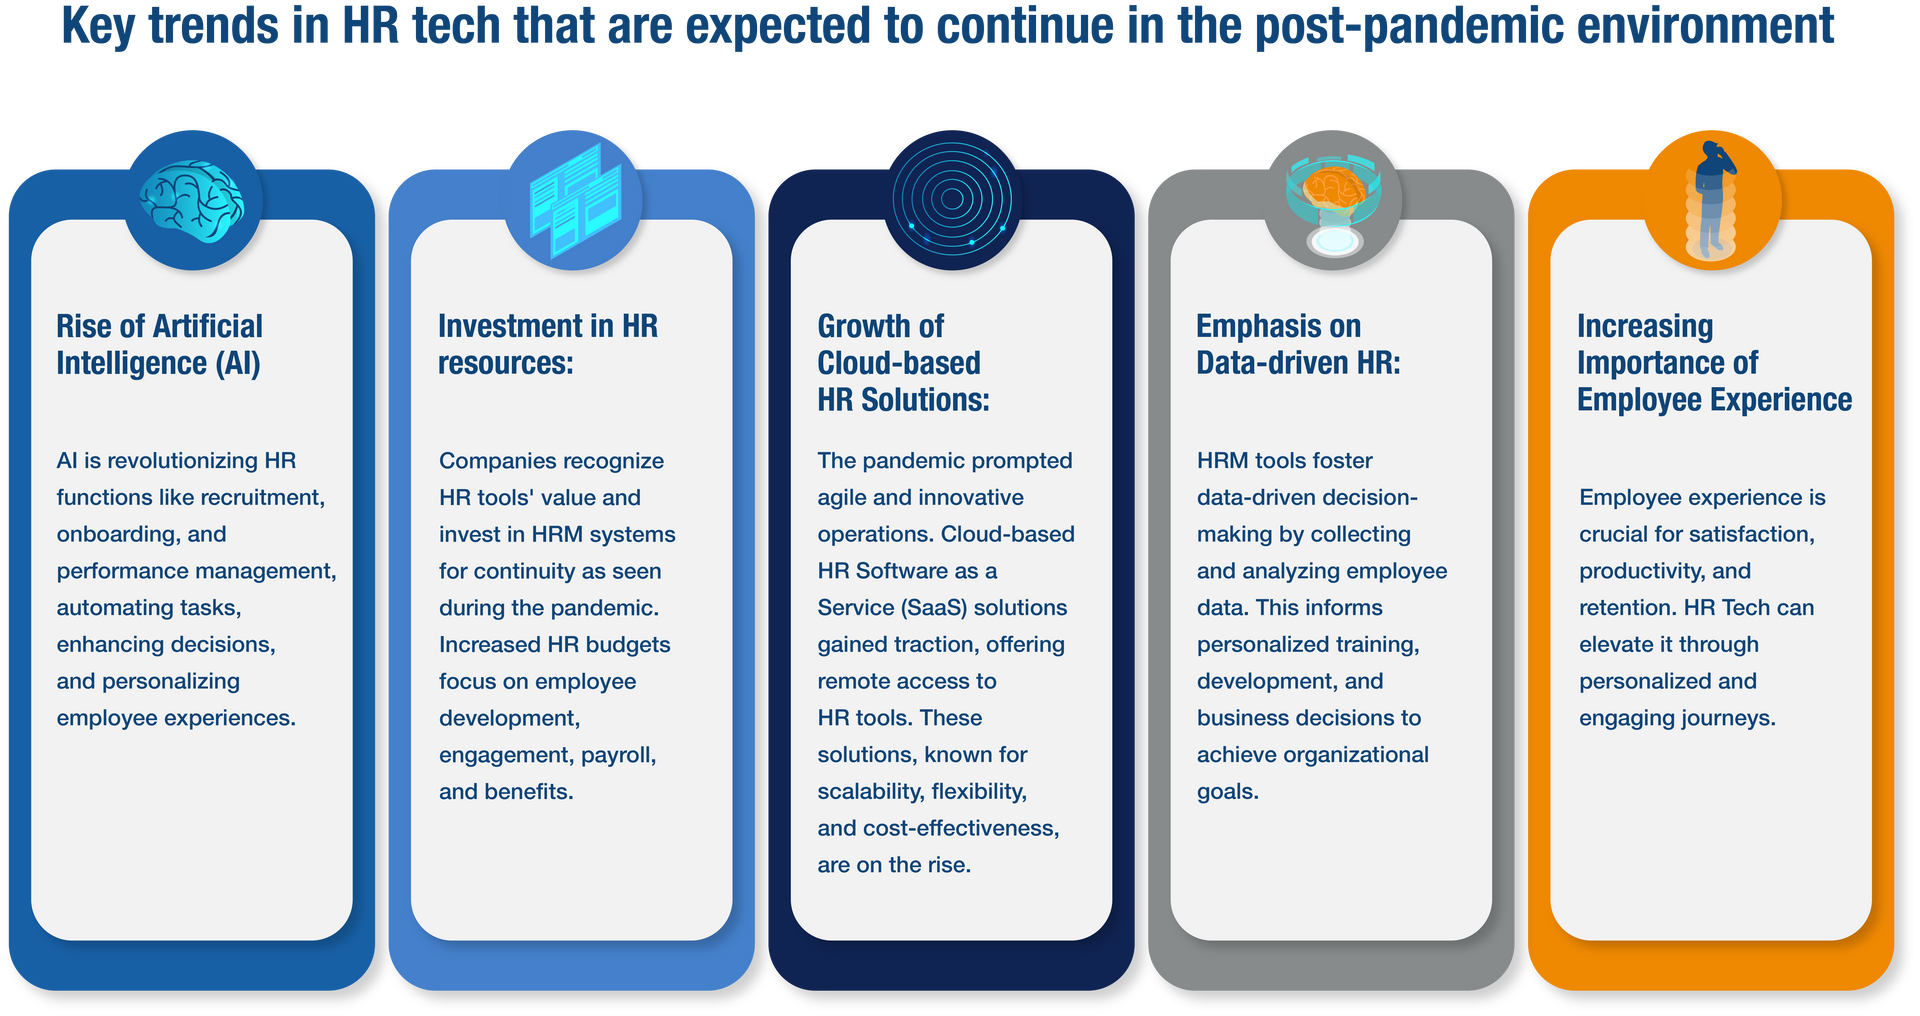 An infographic visualizing five key trends in HR technology expected to continue in the post-pandemic environment: the rise of AI, growth of cloud-based HR solutions, increasing importance of employee experience, investment in HR resources, and emphasis on data-driven HR.